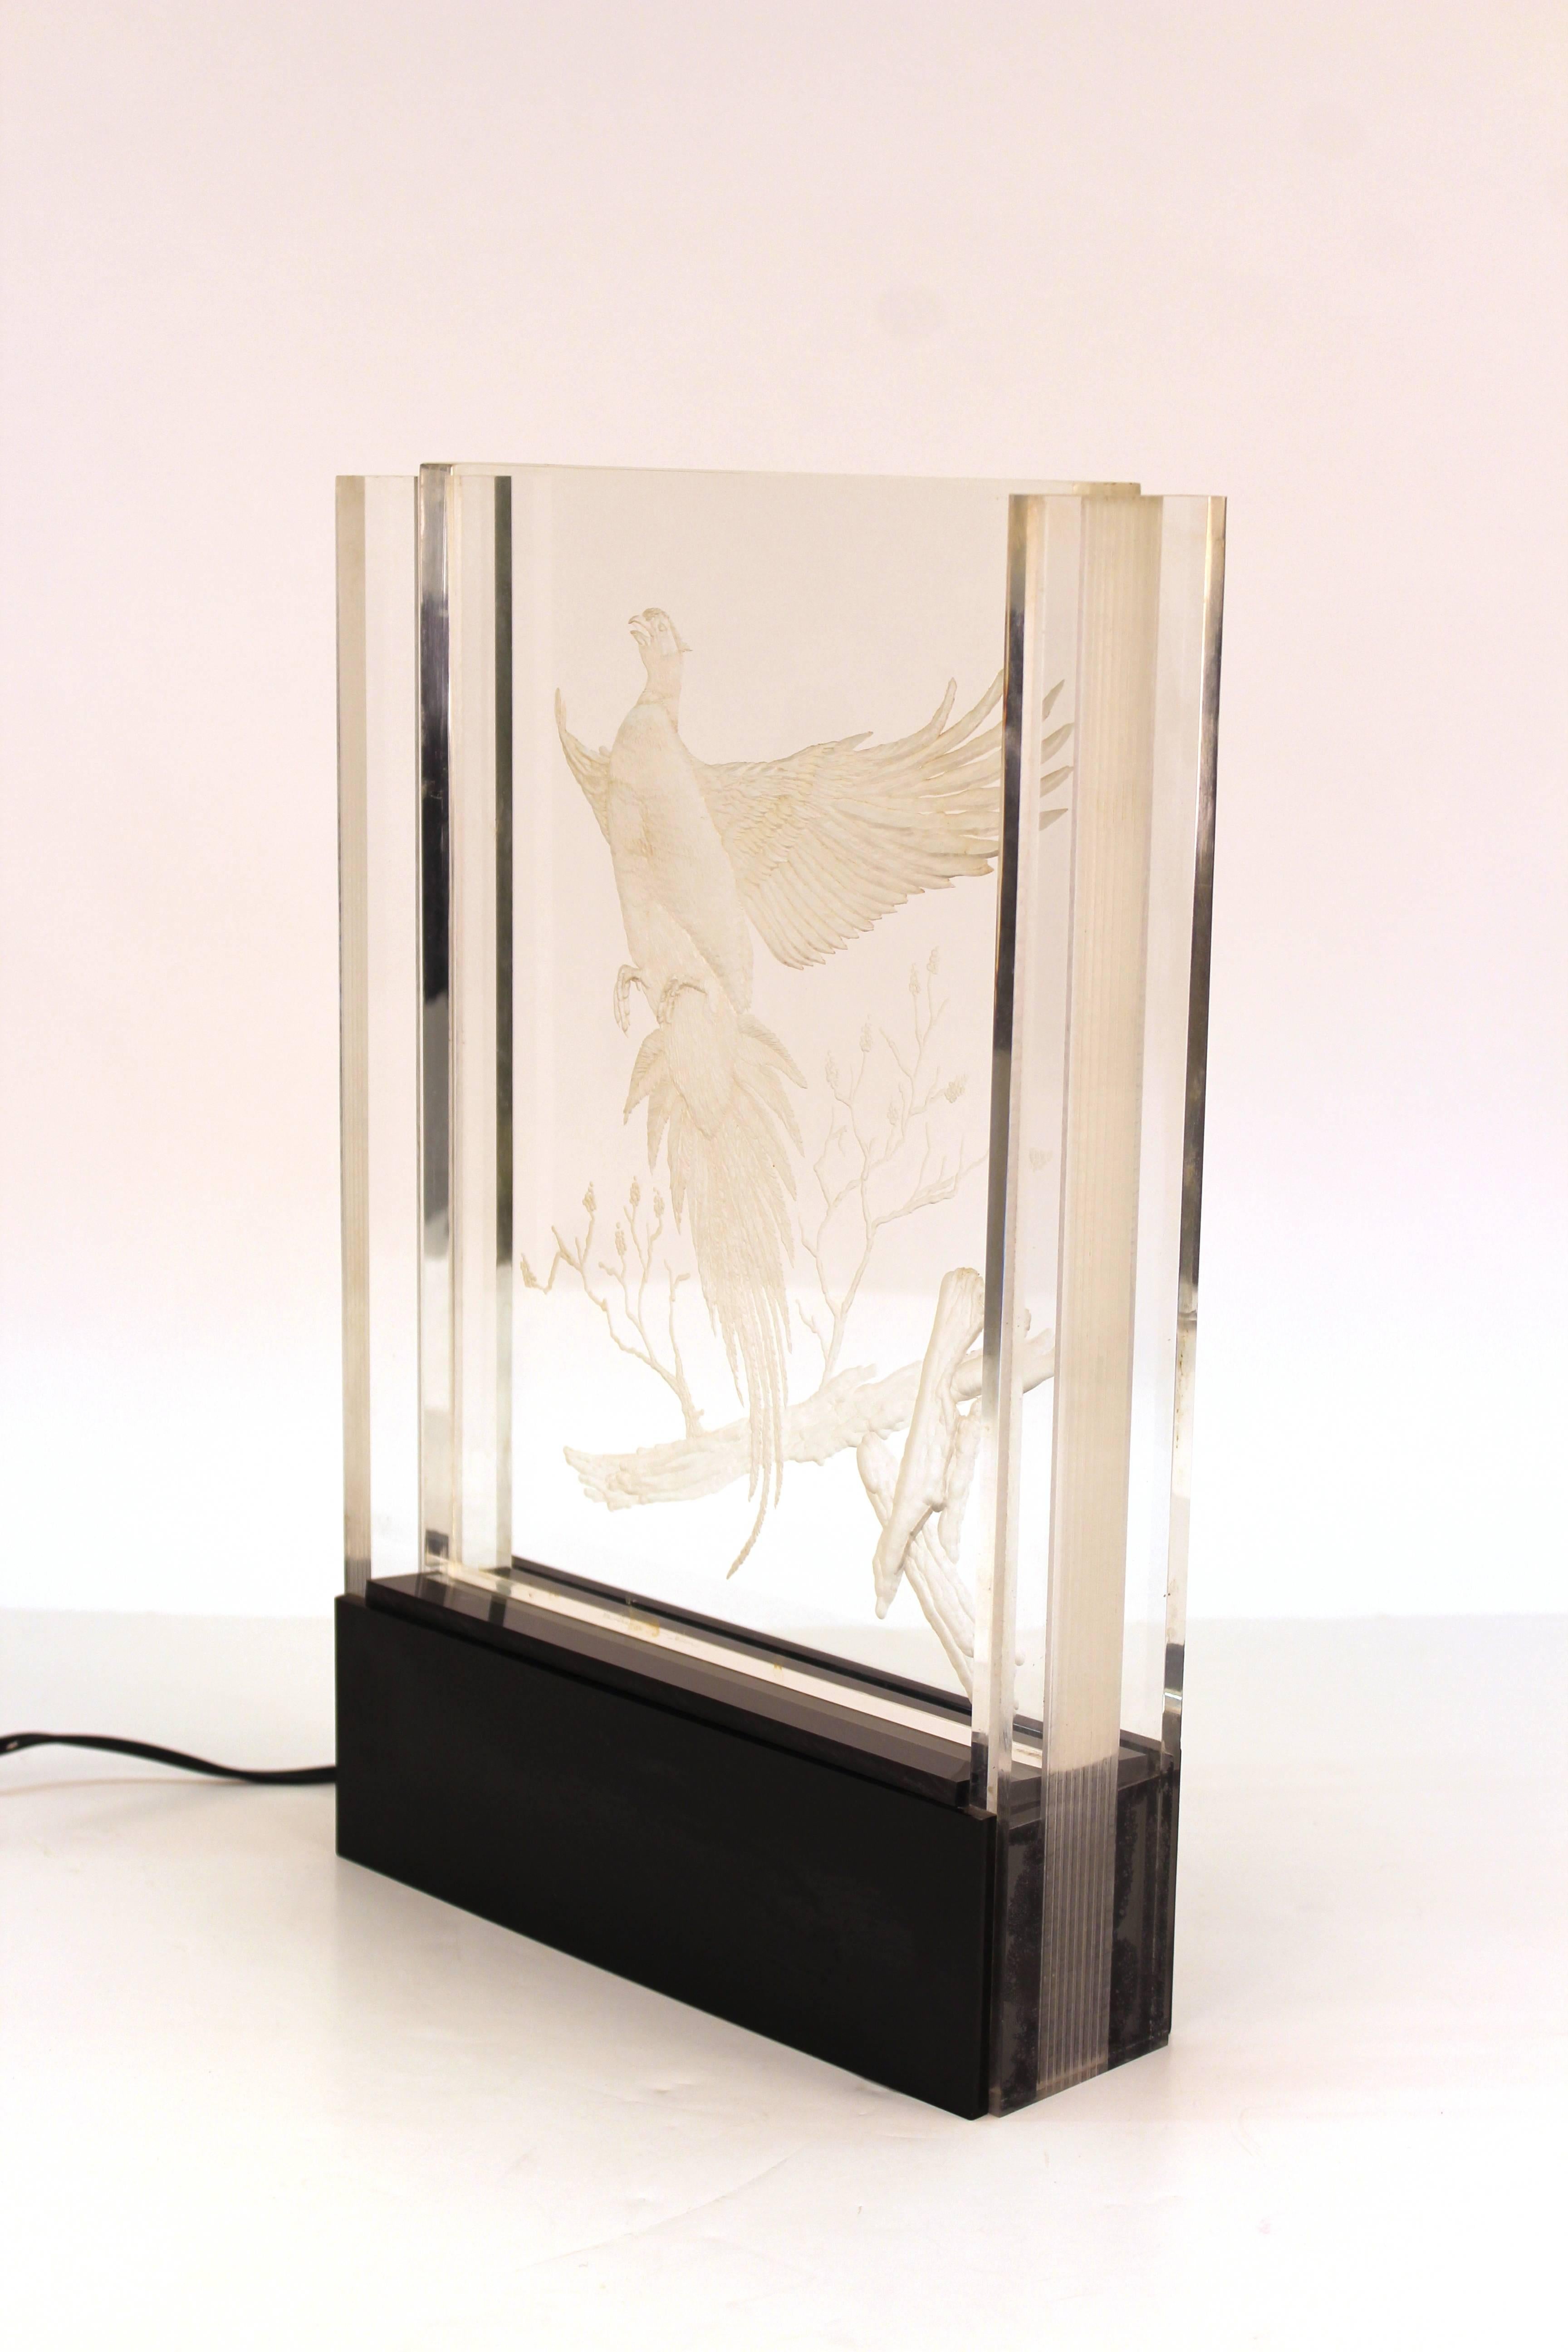 Hollywood Regency Etched Lucite Table Light with Pheasant in Flight 1